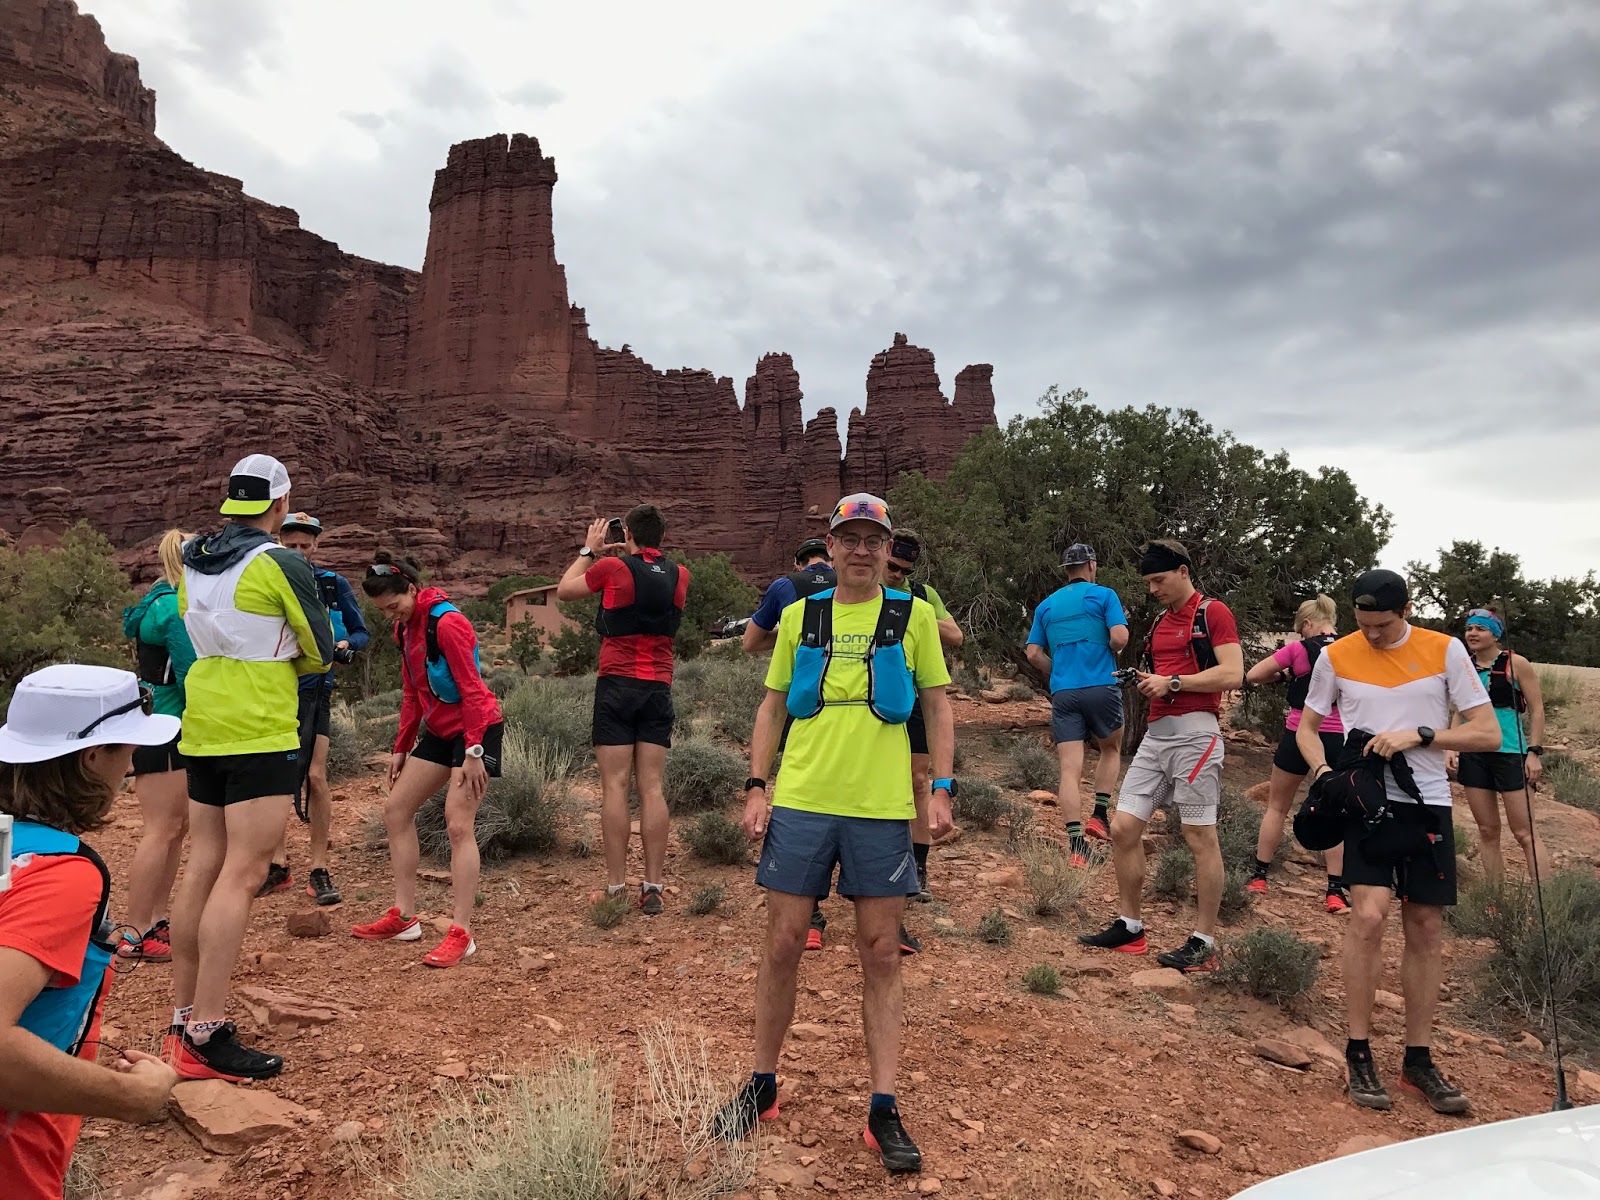 regering røveri ~ side Road Trail Run: Salomon Ultra Running Academy 2017 Moab: Summary, Pictures,  Videos of Nutrition and Hydration & Uphill Technique- Max King and Anna  Frost, Running with Poles-Greg Vollet